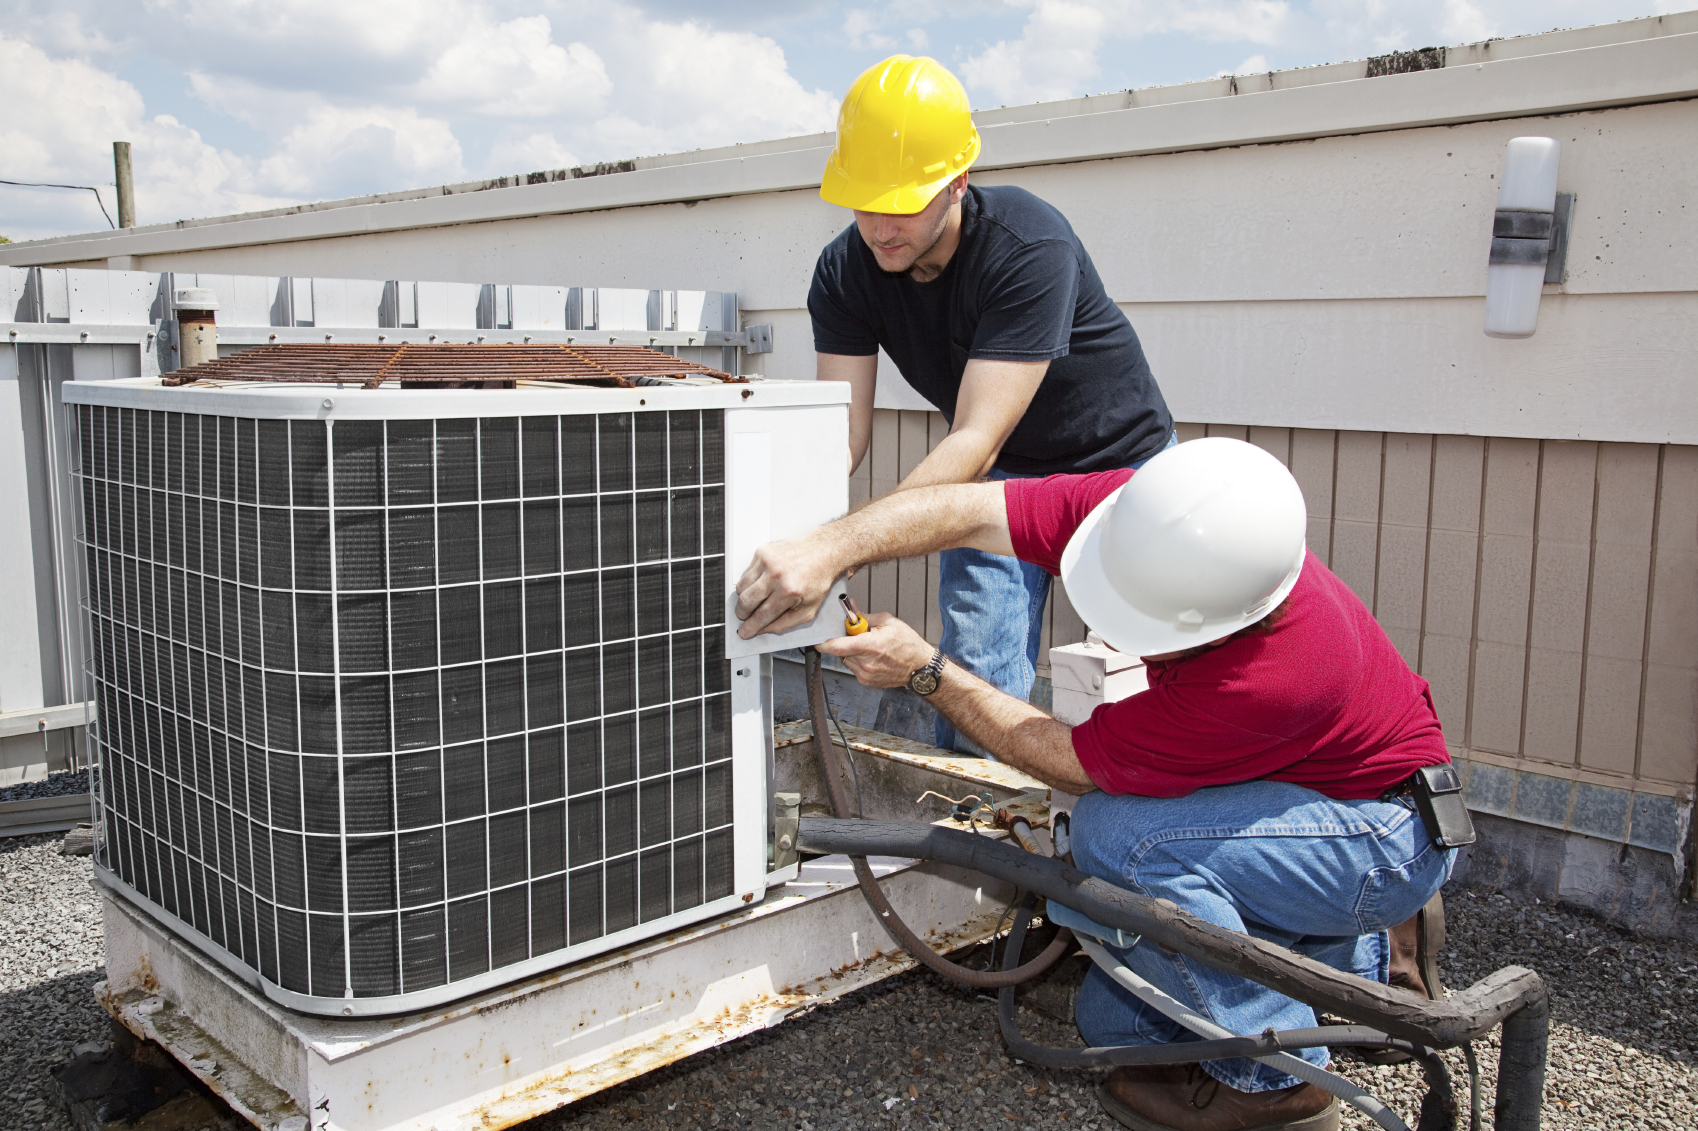 How To Figure Out What's Wrong With Your Air Conditioner